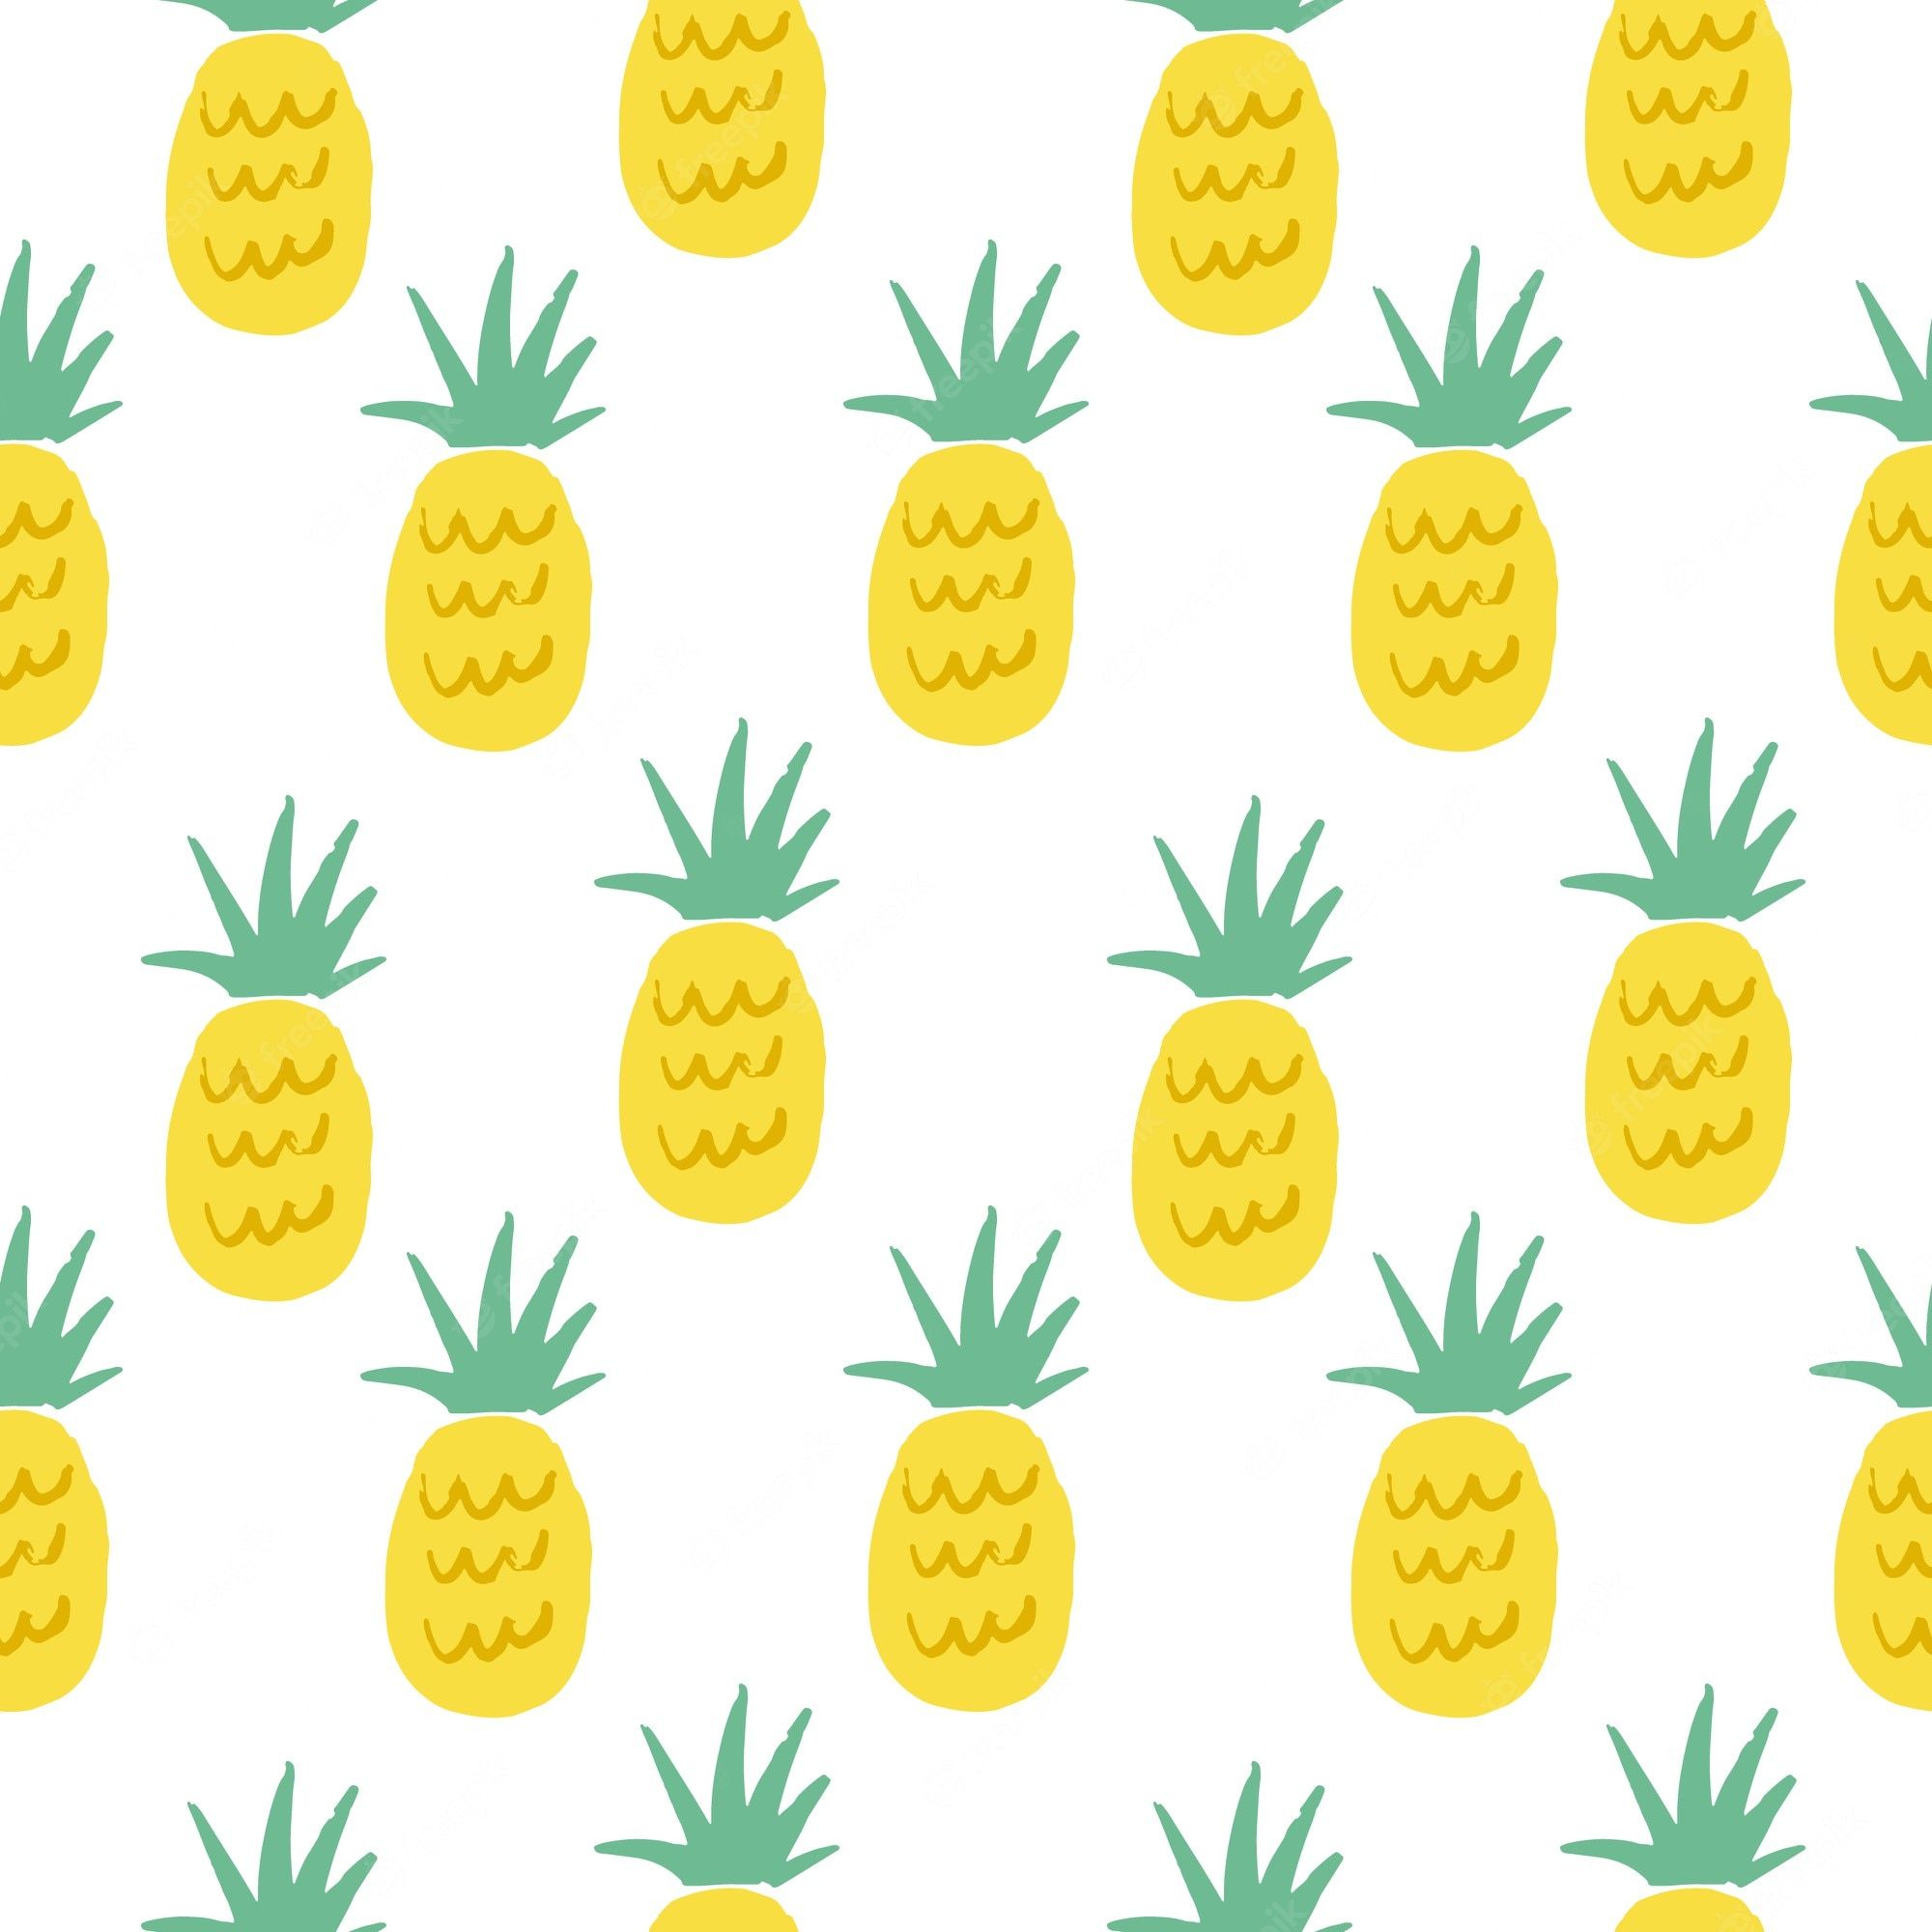 Wallpaper Cute Pineapple Picture